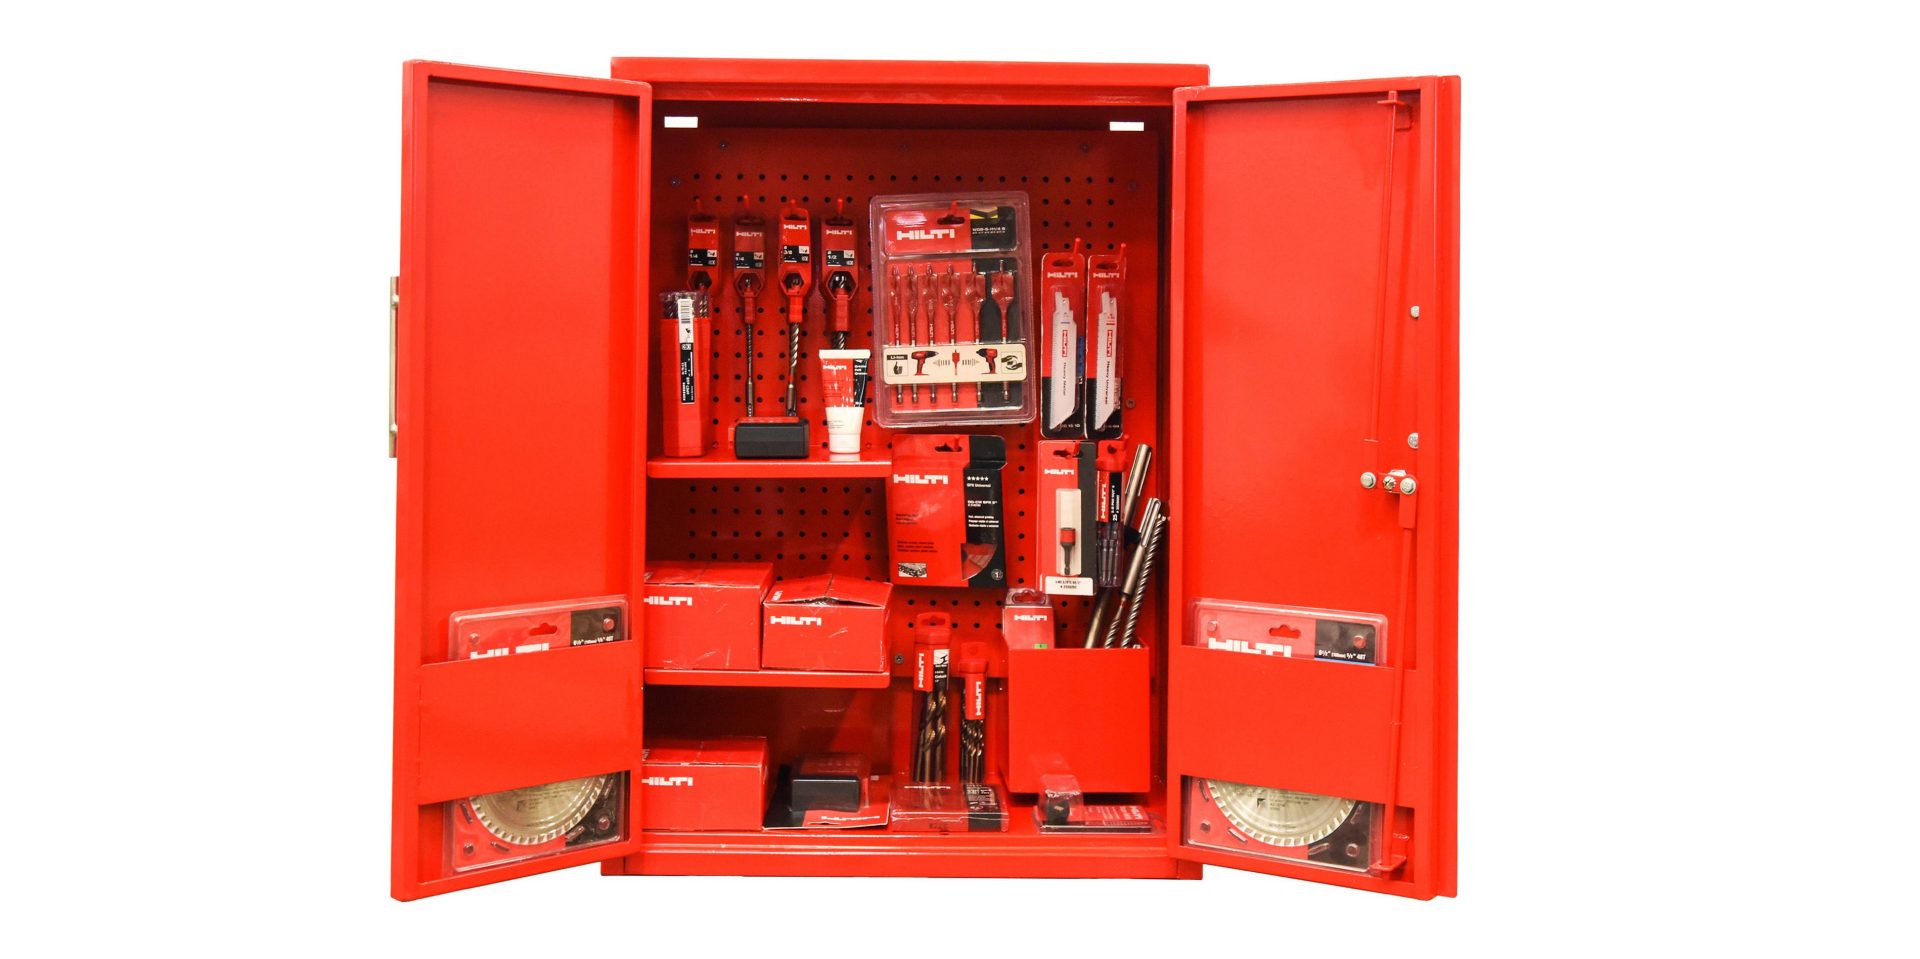 open hilti consumable cabinet with hilti products inside